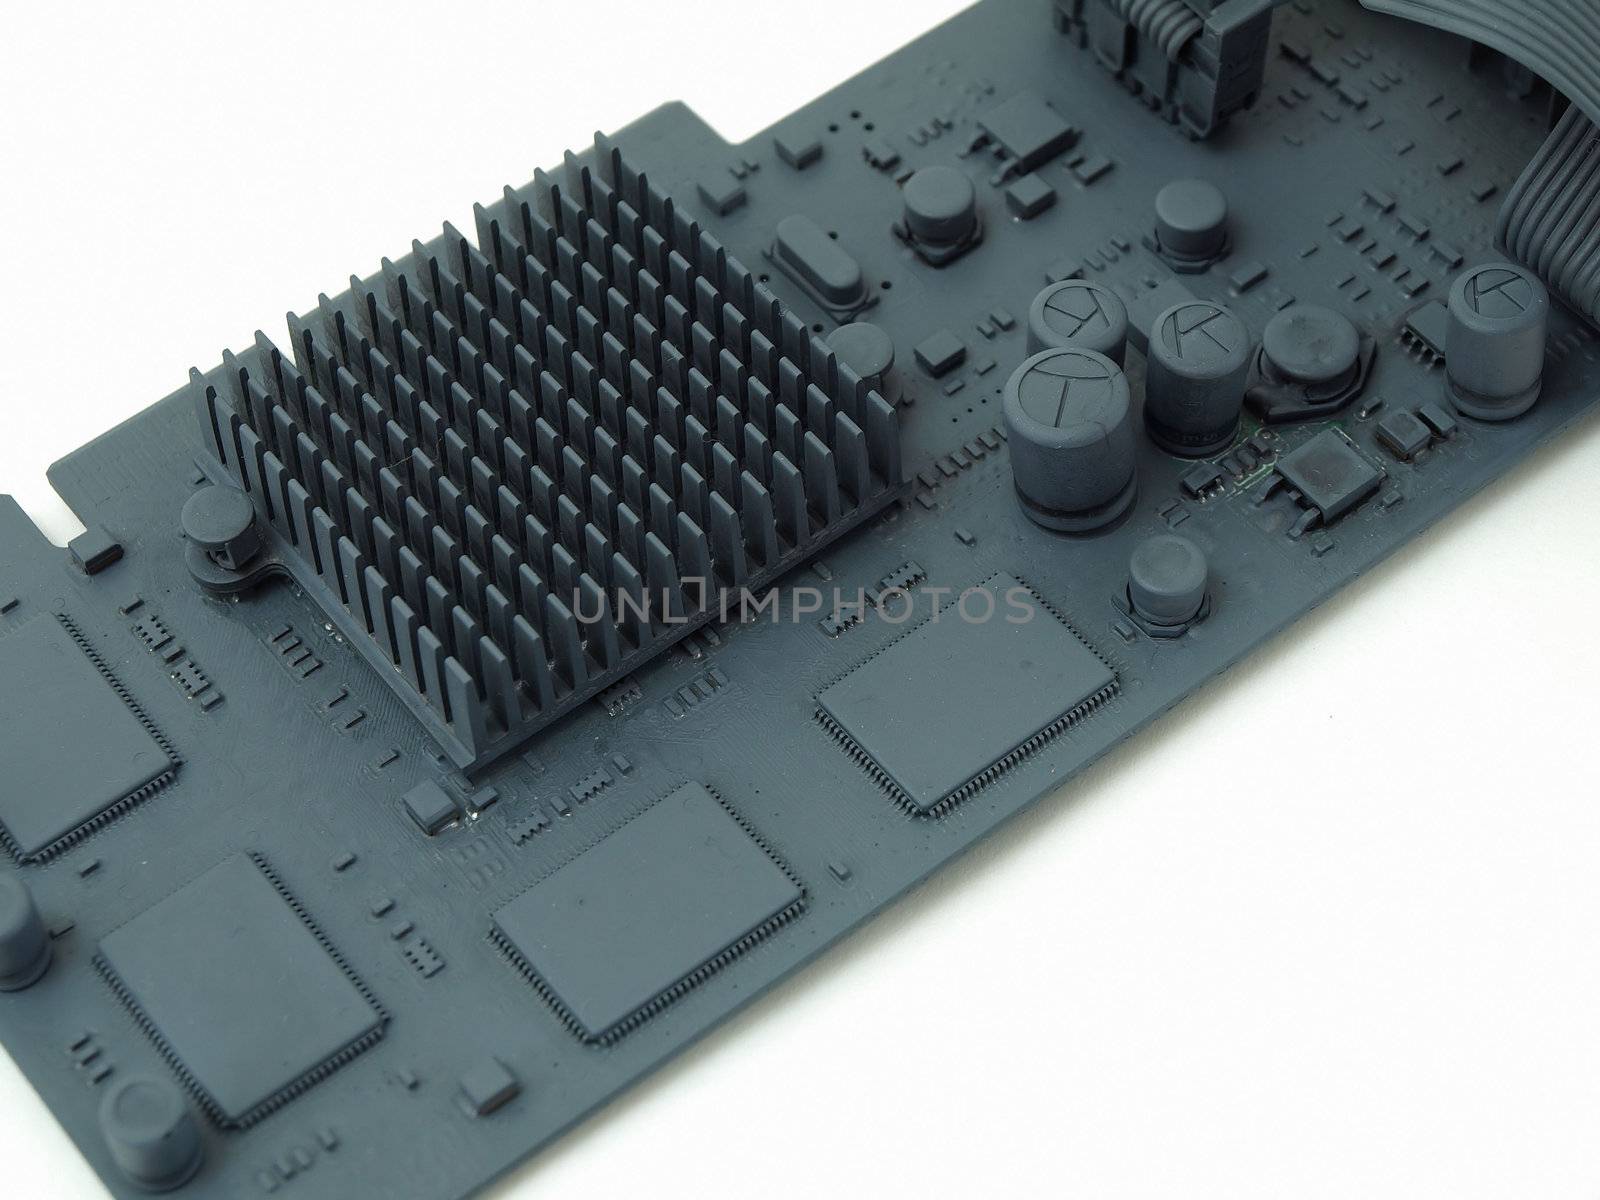 A generic computer video card isolated on a white background.